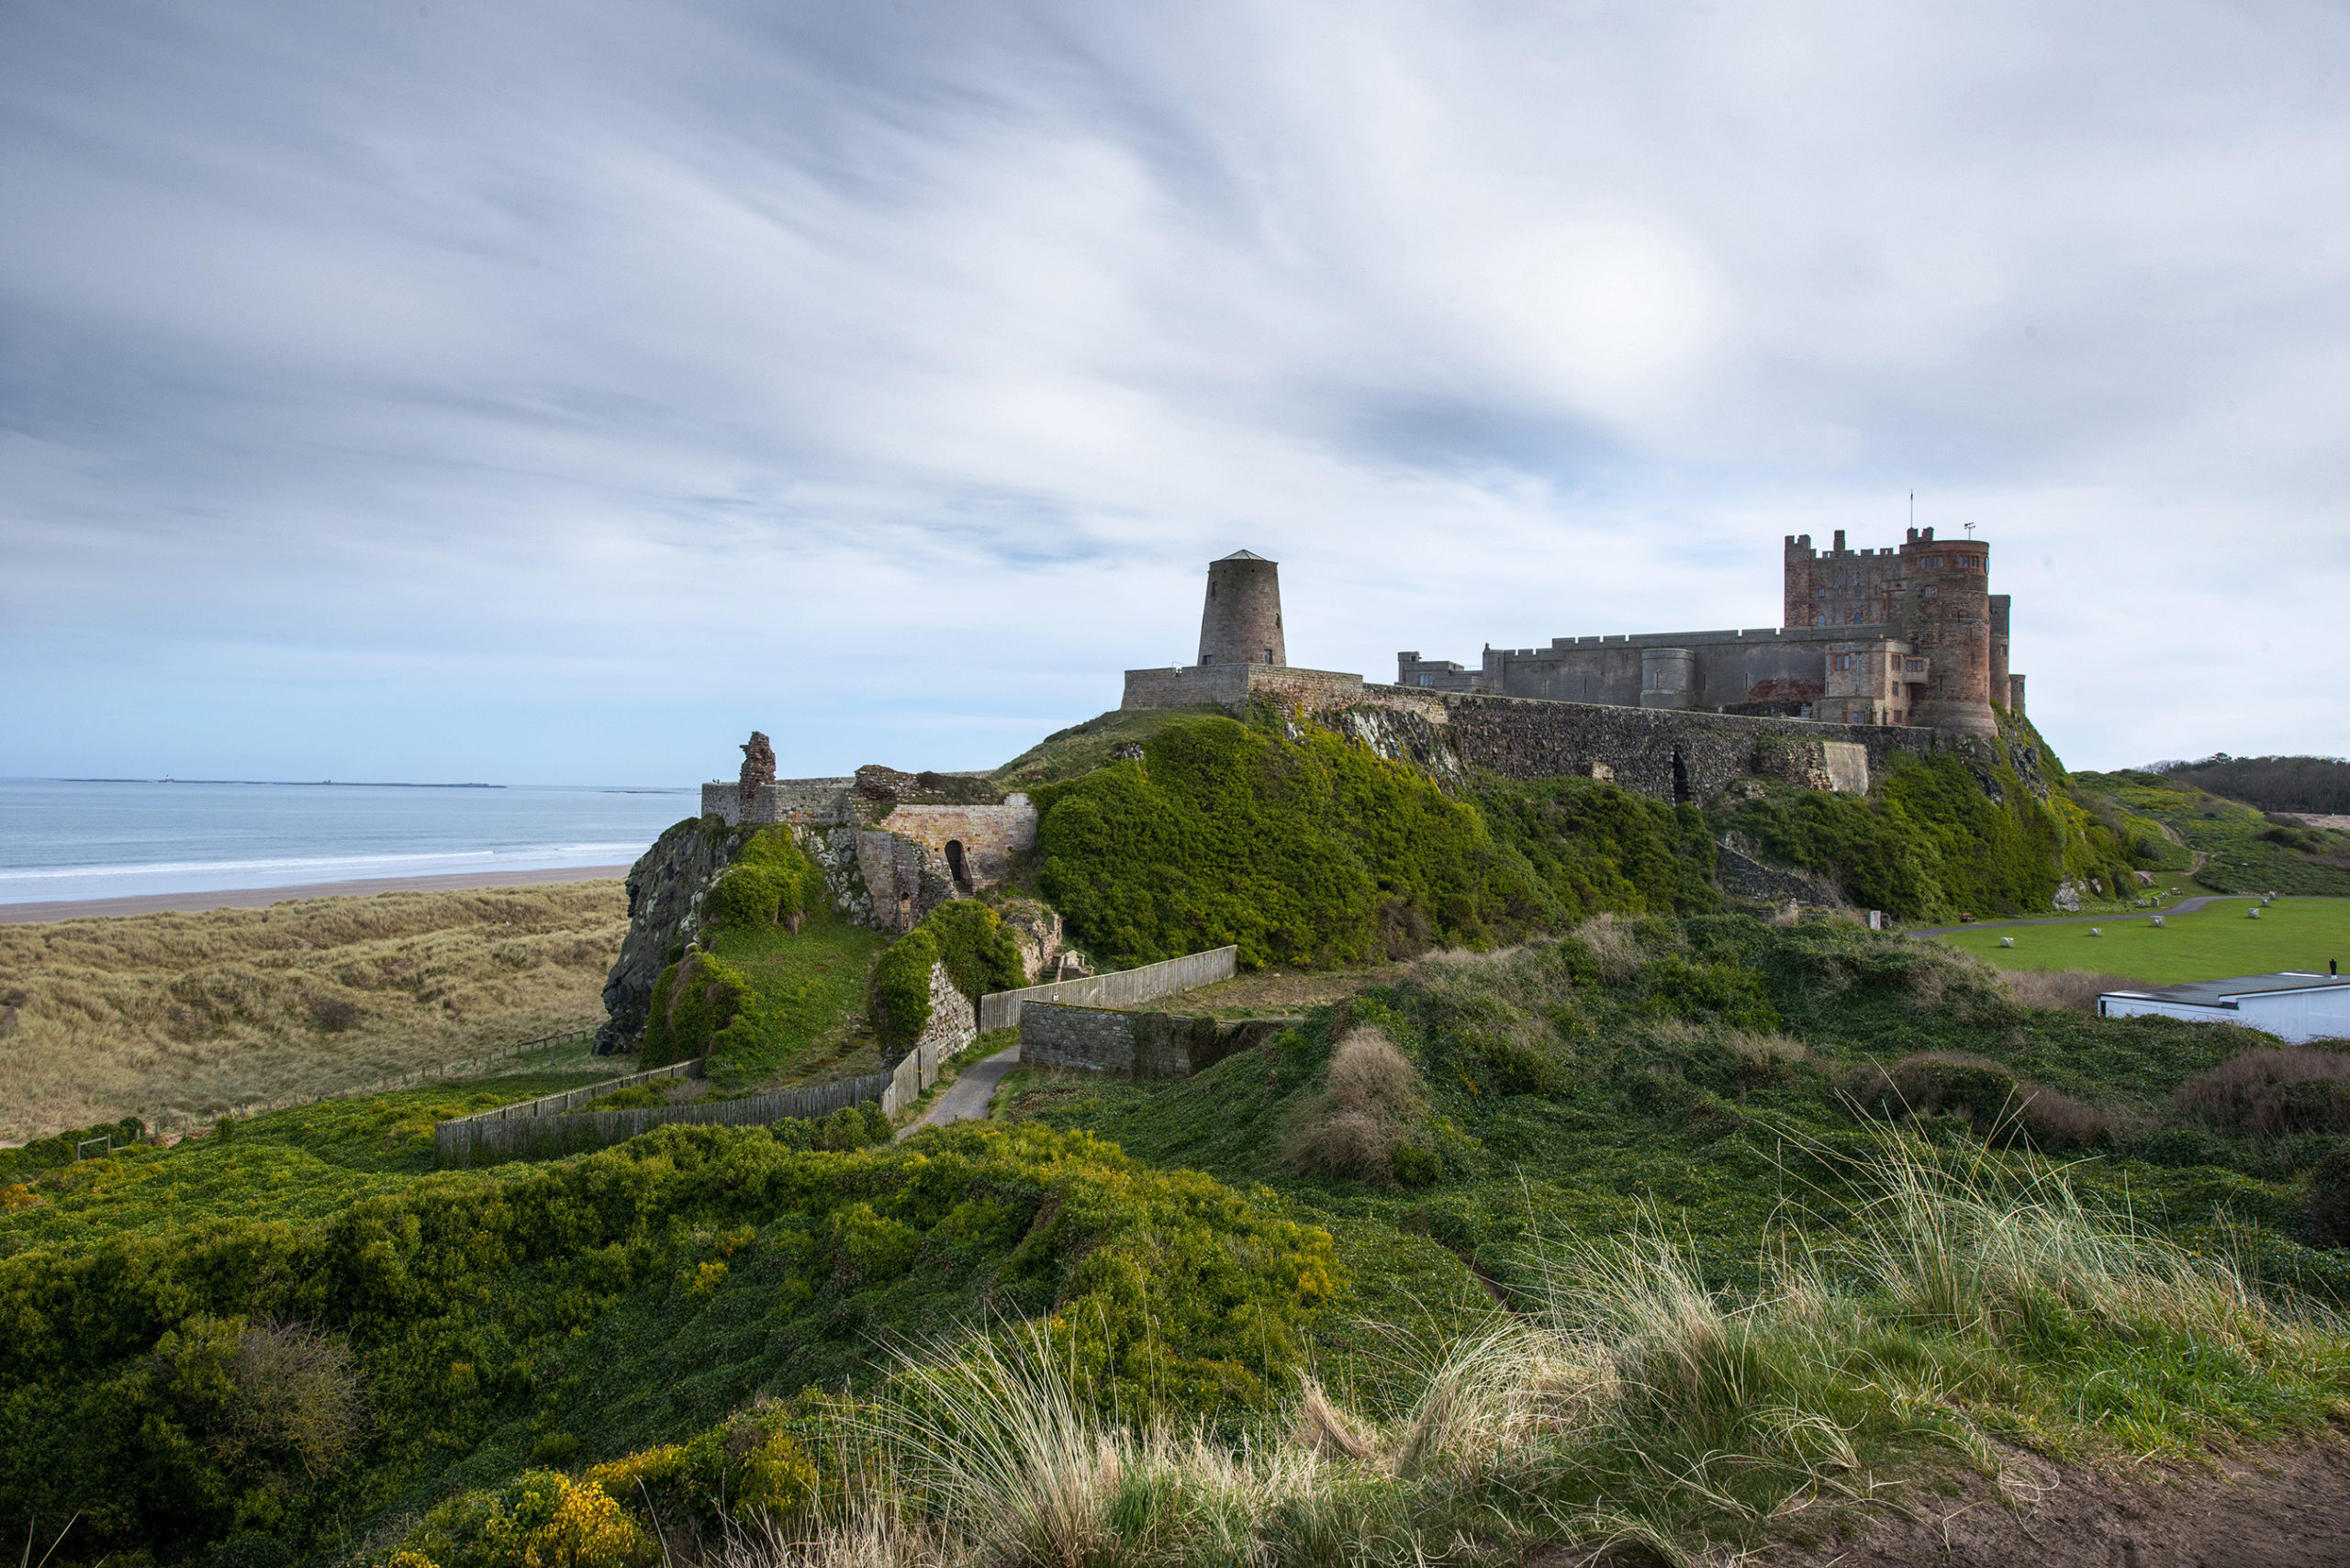 Image looking towards Bamburgh Castle in Northumberland with North Sea in background